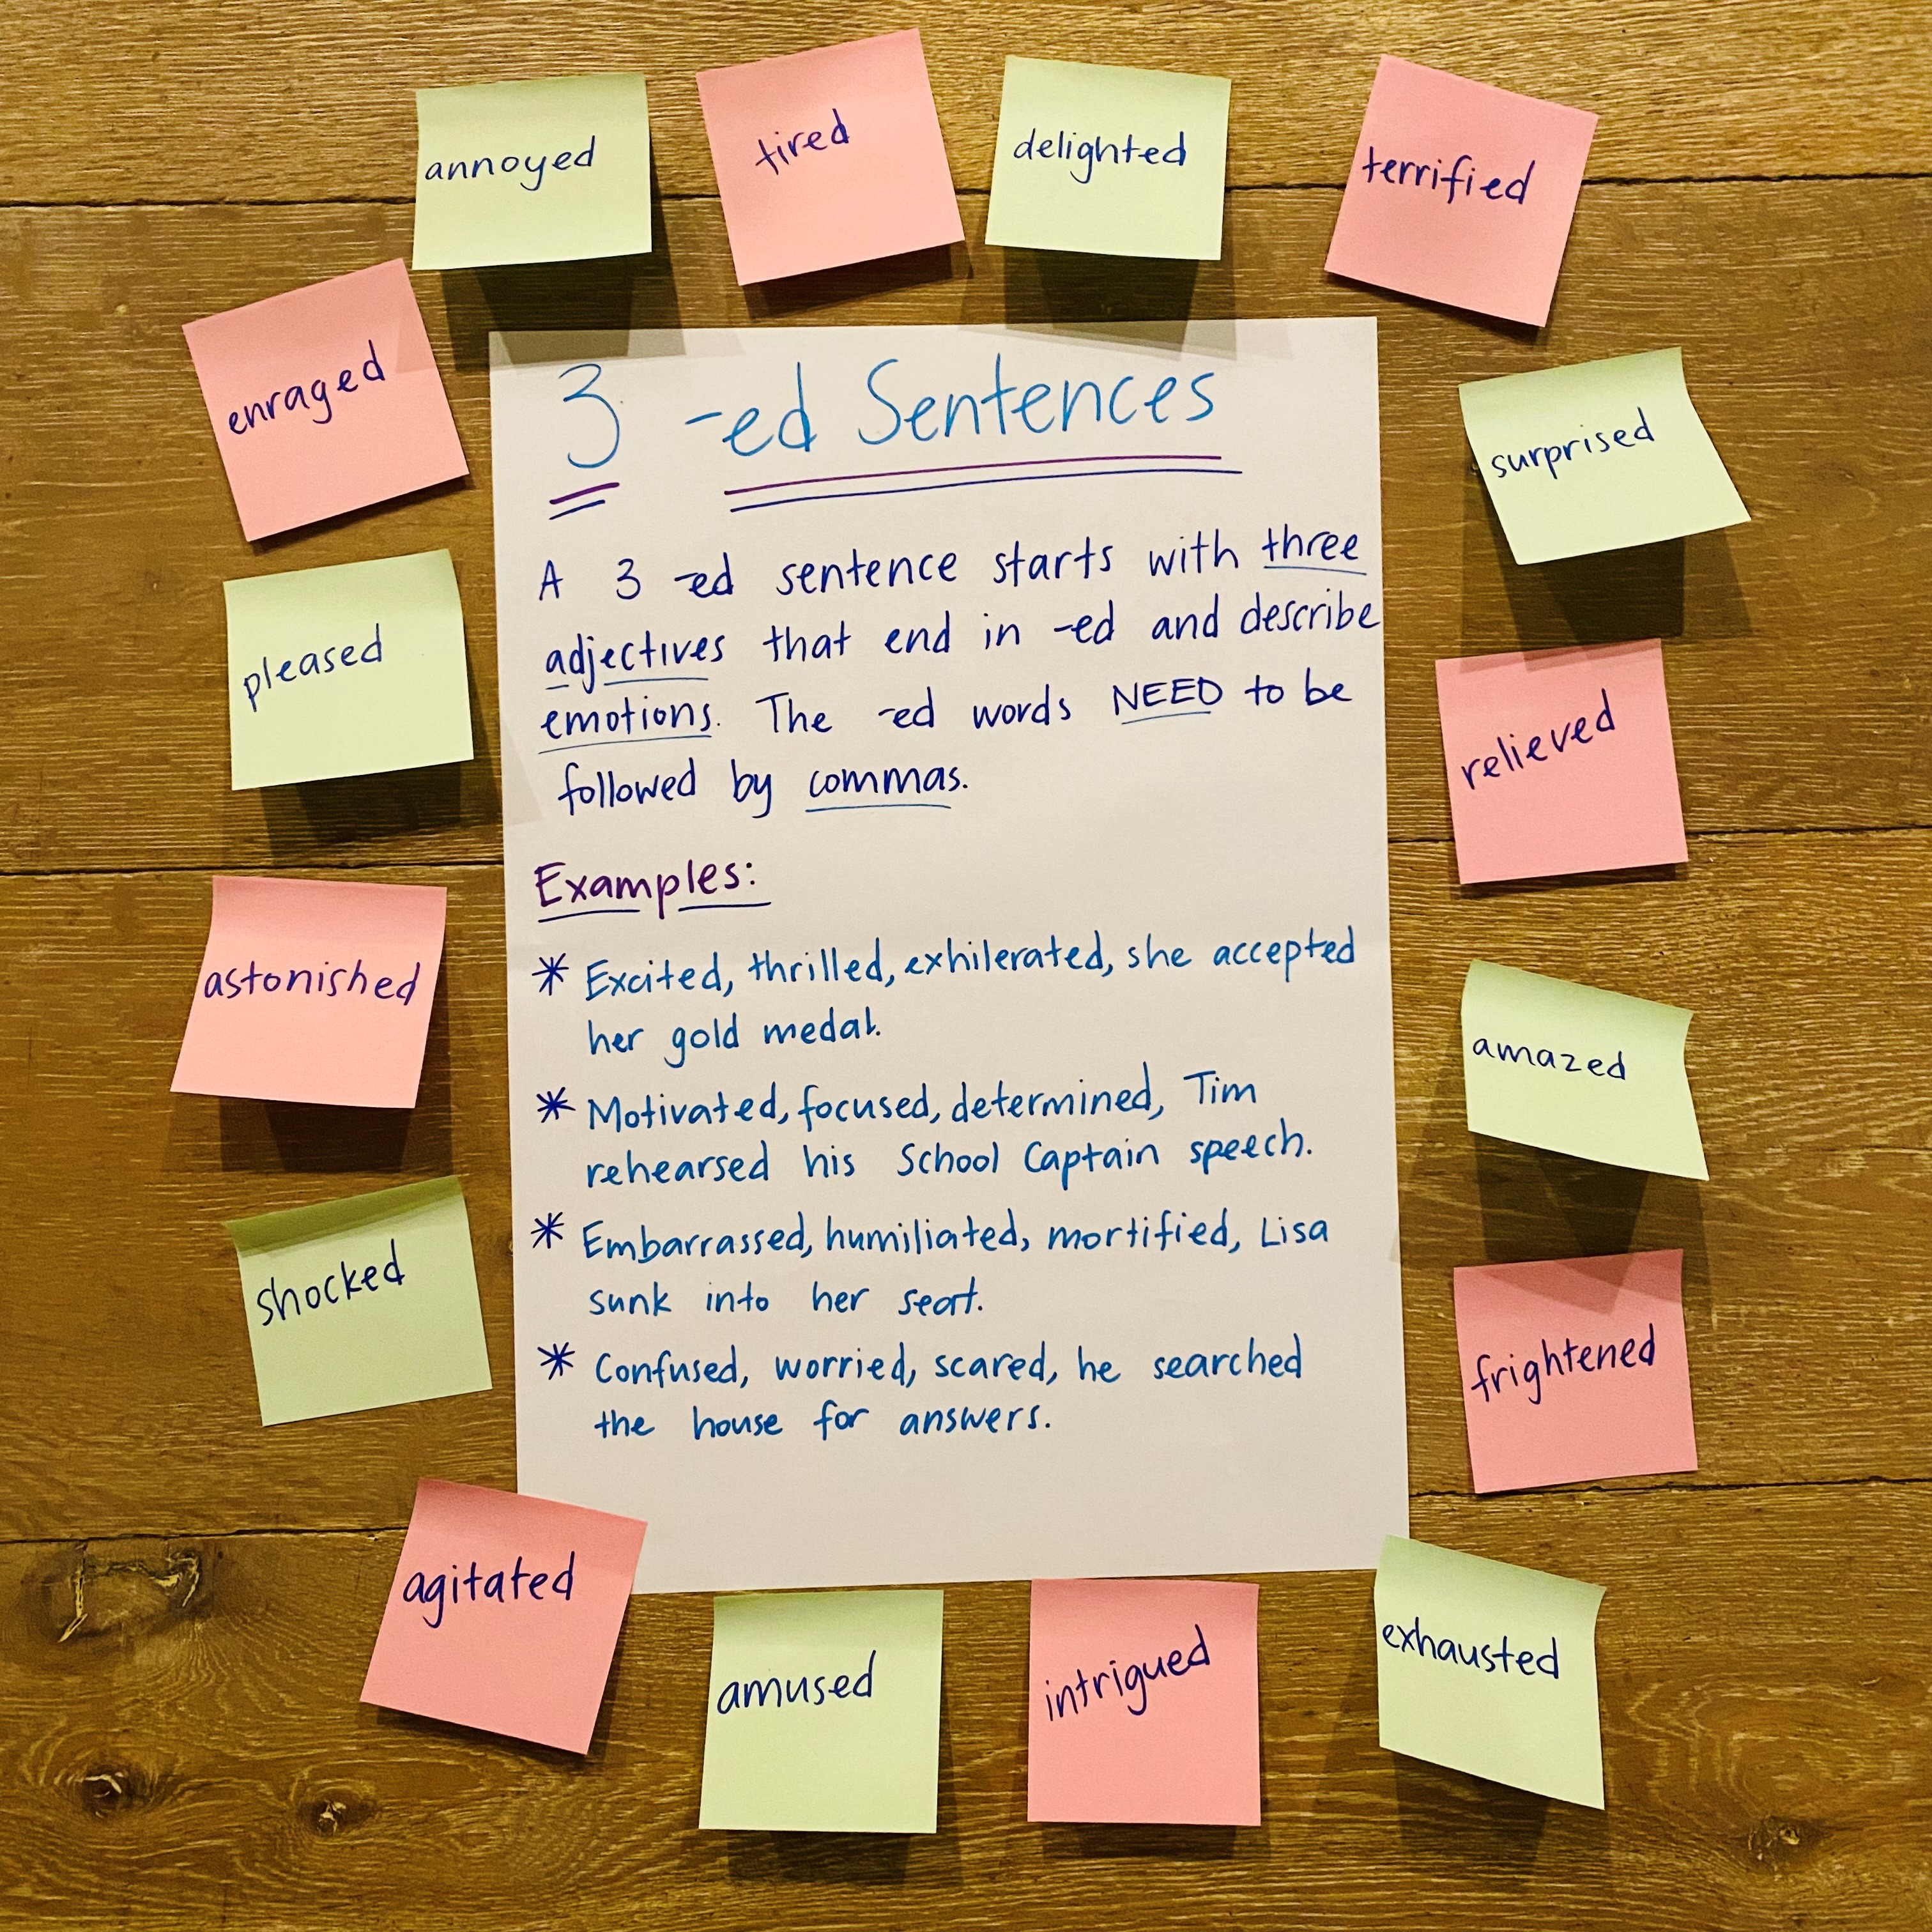 A succinct writing lesson to support students to write engaging sentences, following the 3 -ed structure. The lesson equips students with the skills required to construct a range of varied sentence types, using a range of adjectives to describe emotions as sentence starters.